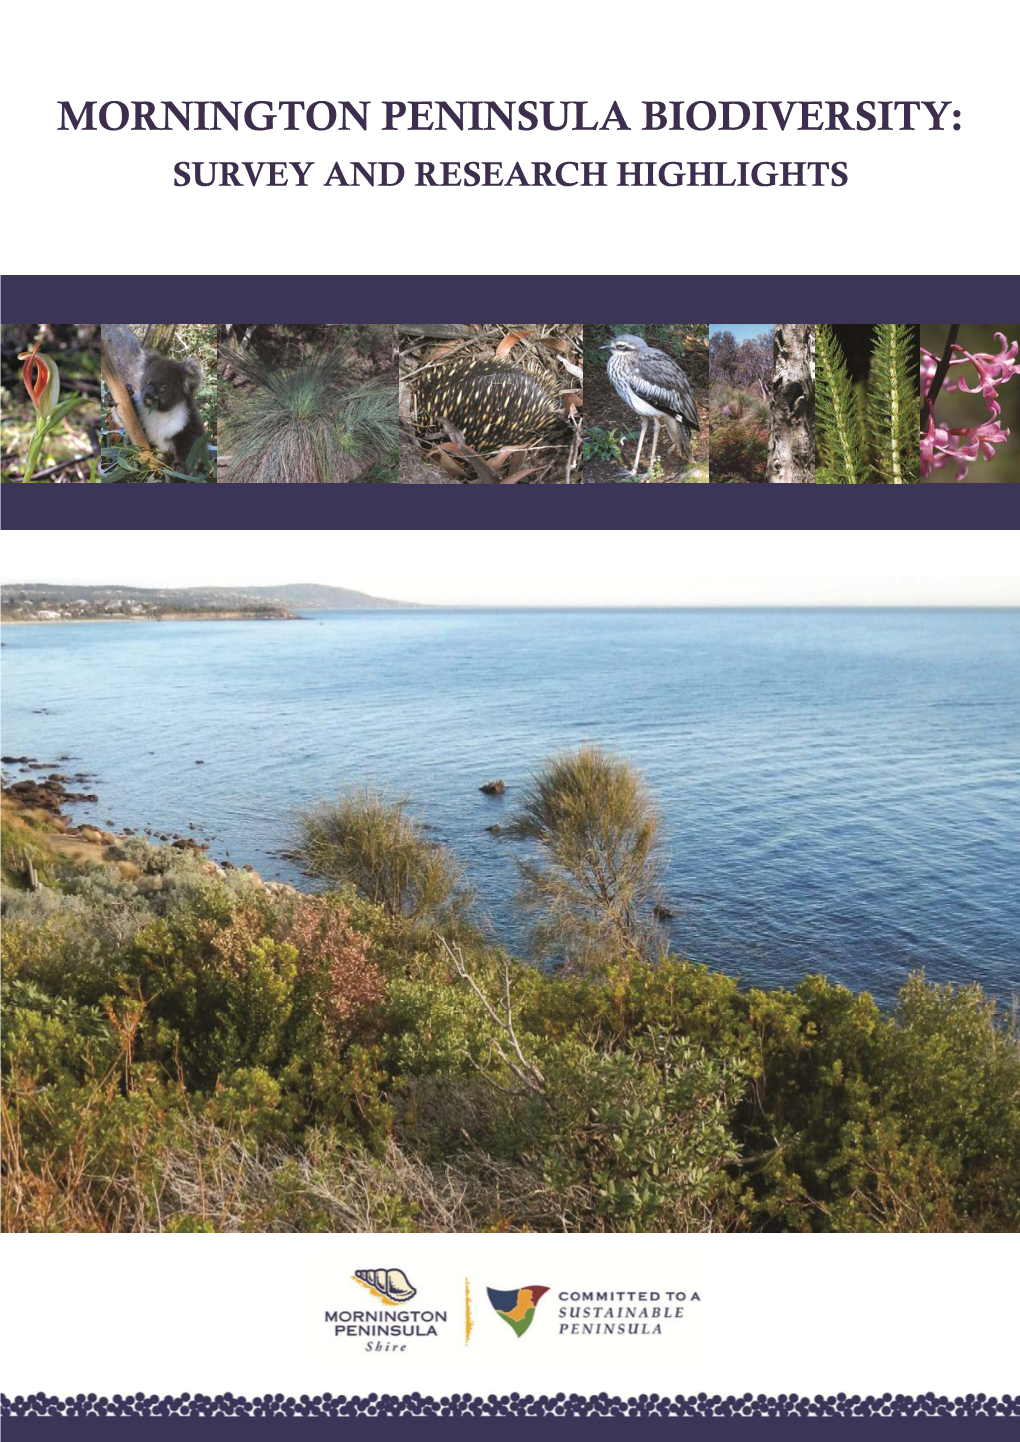 MORNINGTON PENINSULA BIODIVERSITY: SURVEY and RESEARCH HIGHLIGHTS Design and Editing: Linda Bester, Universal Ecology Services